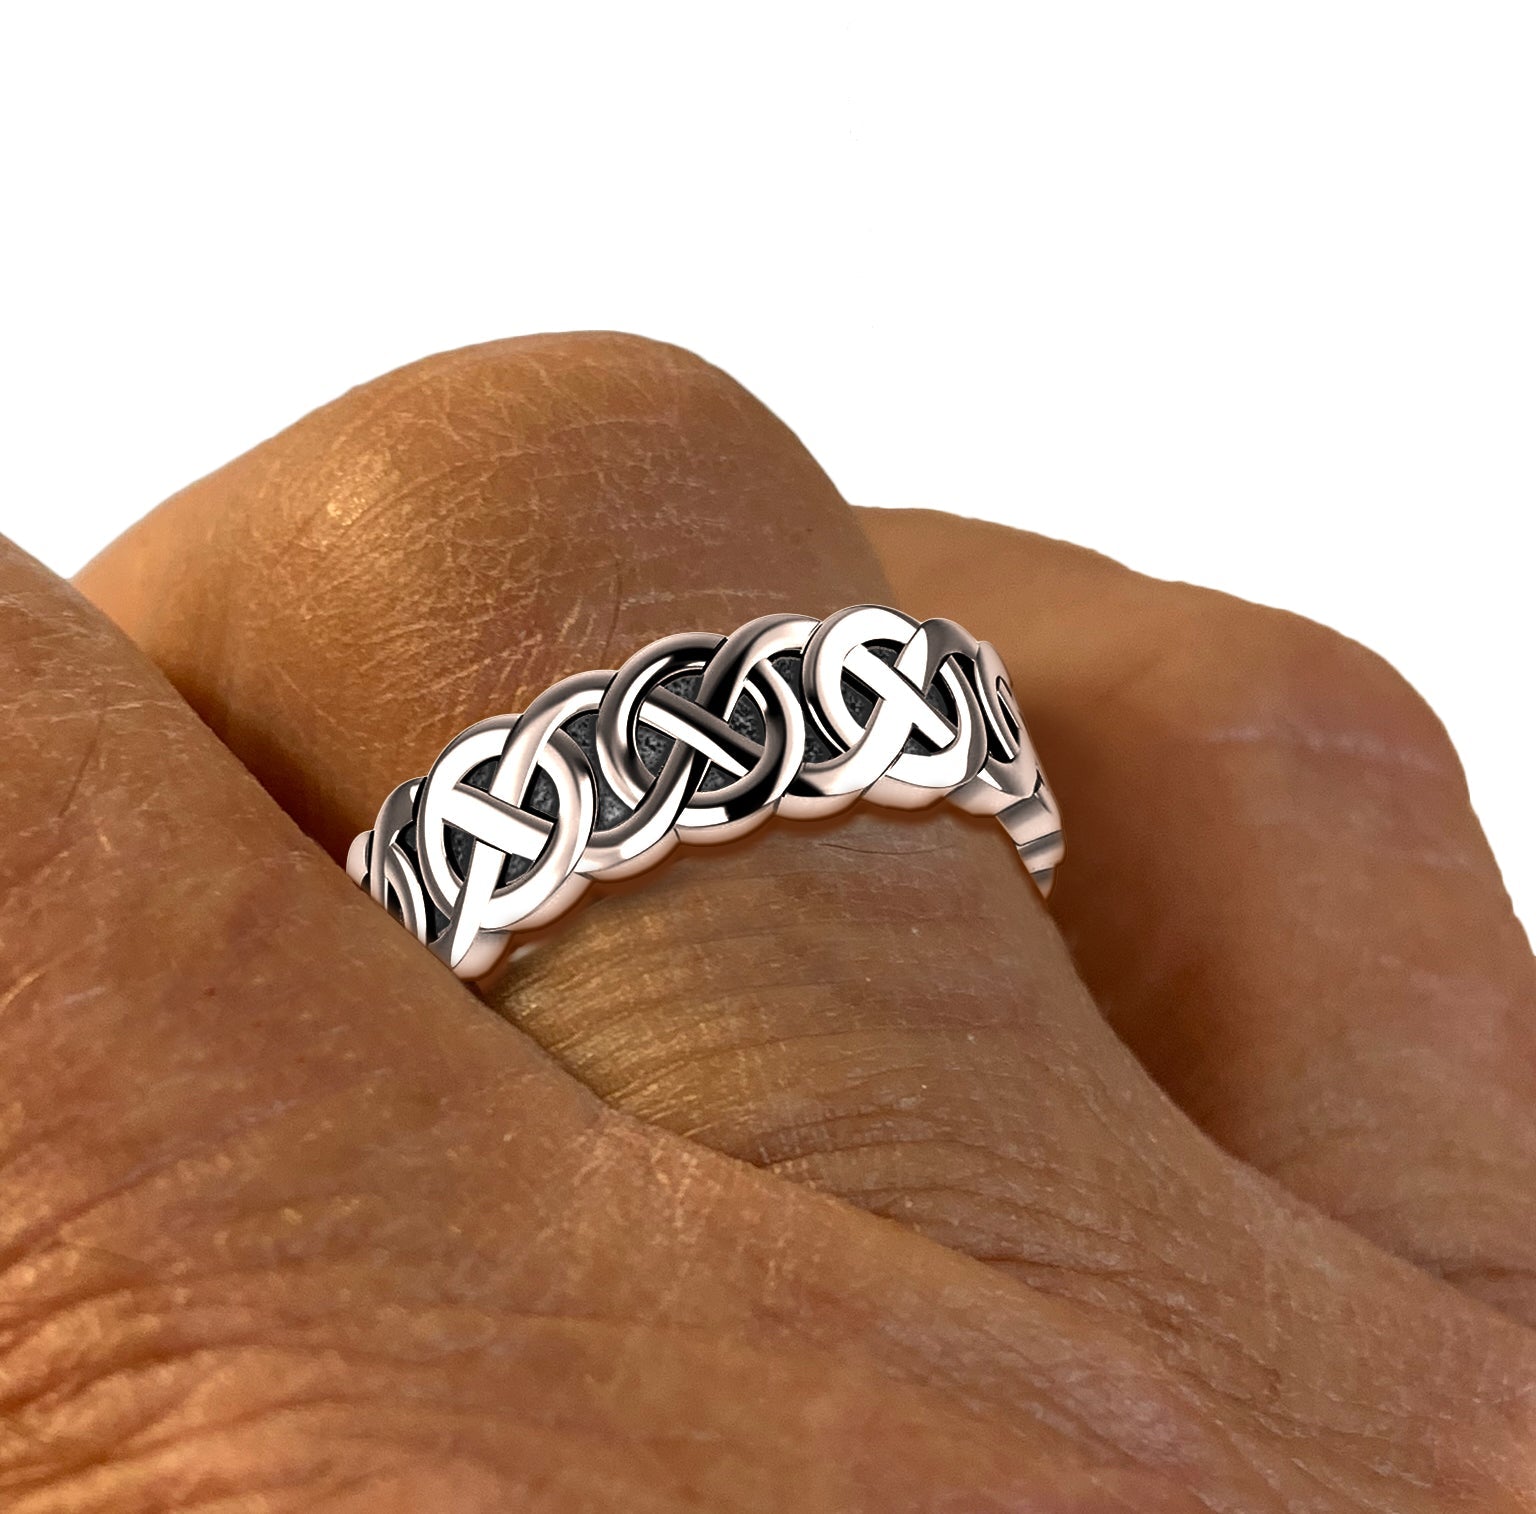 Men's 925 Sterling Silver Irish Celtic Knot Wedding Ring Band - US Jewels